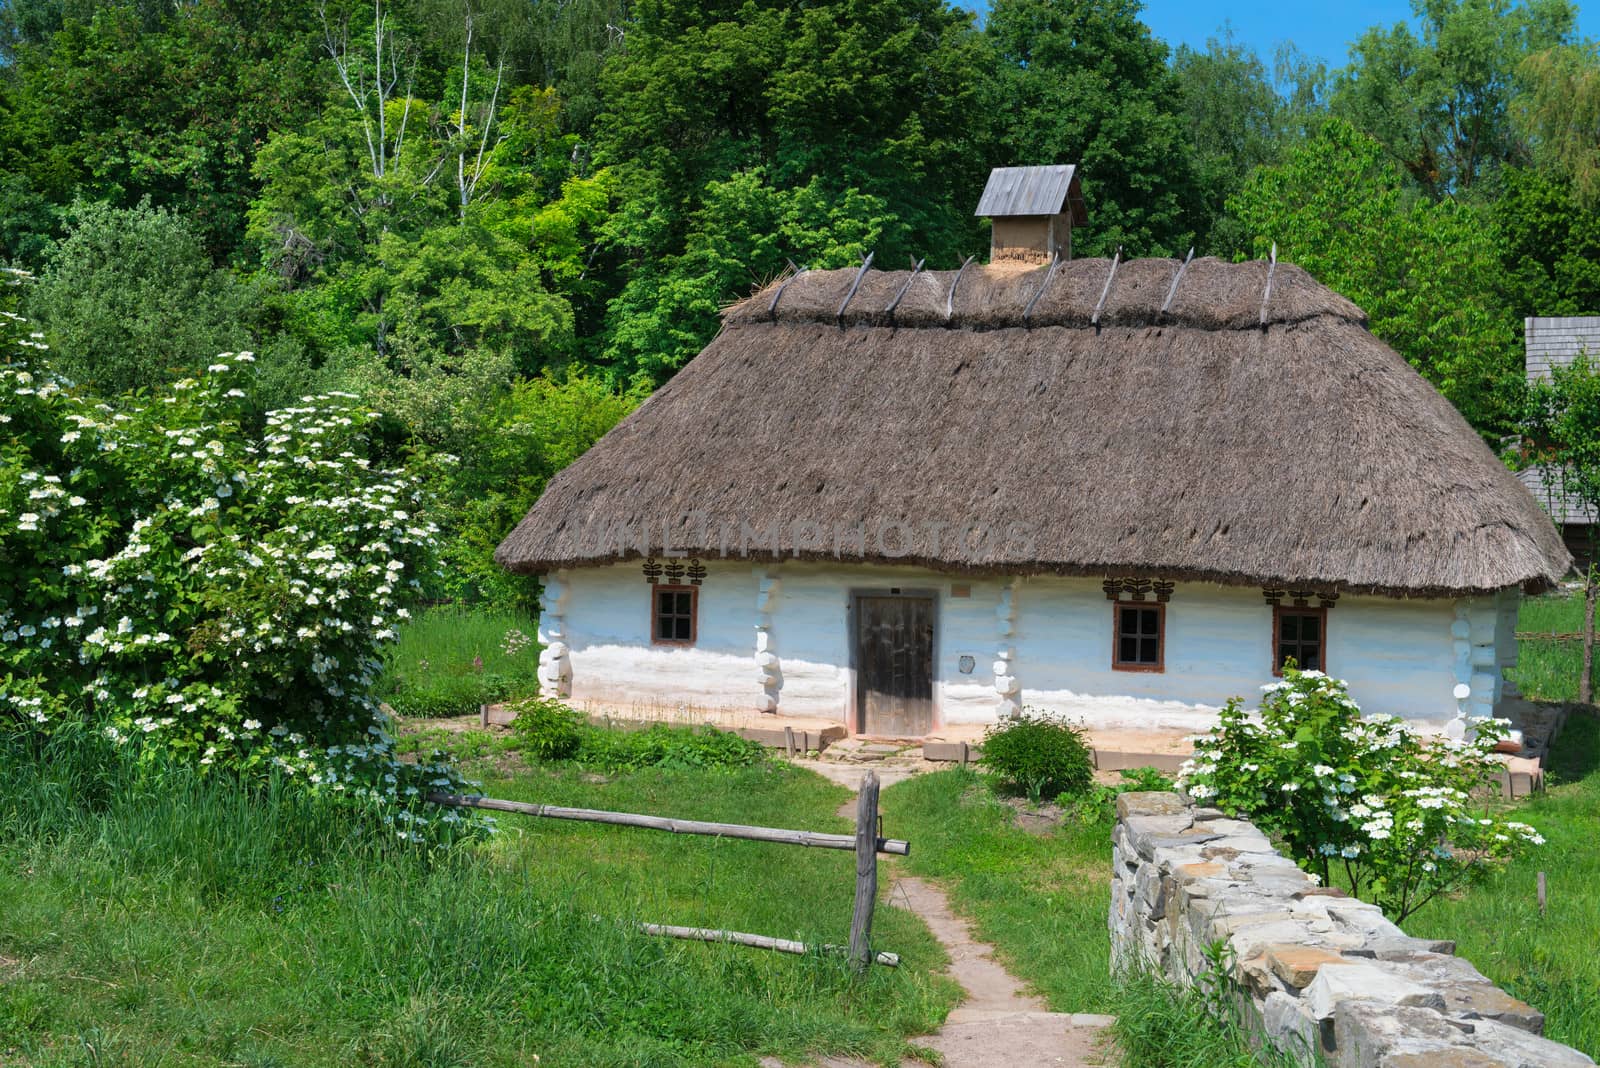 Typical village house in Ukrainian countryside with gardens around